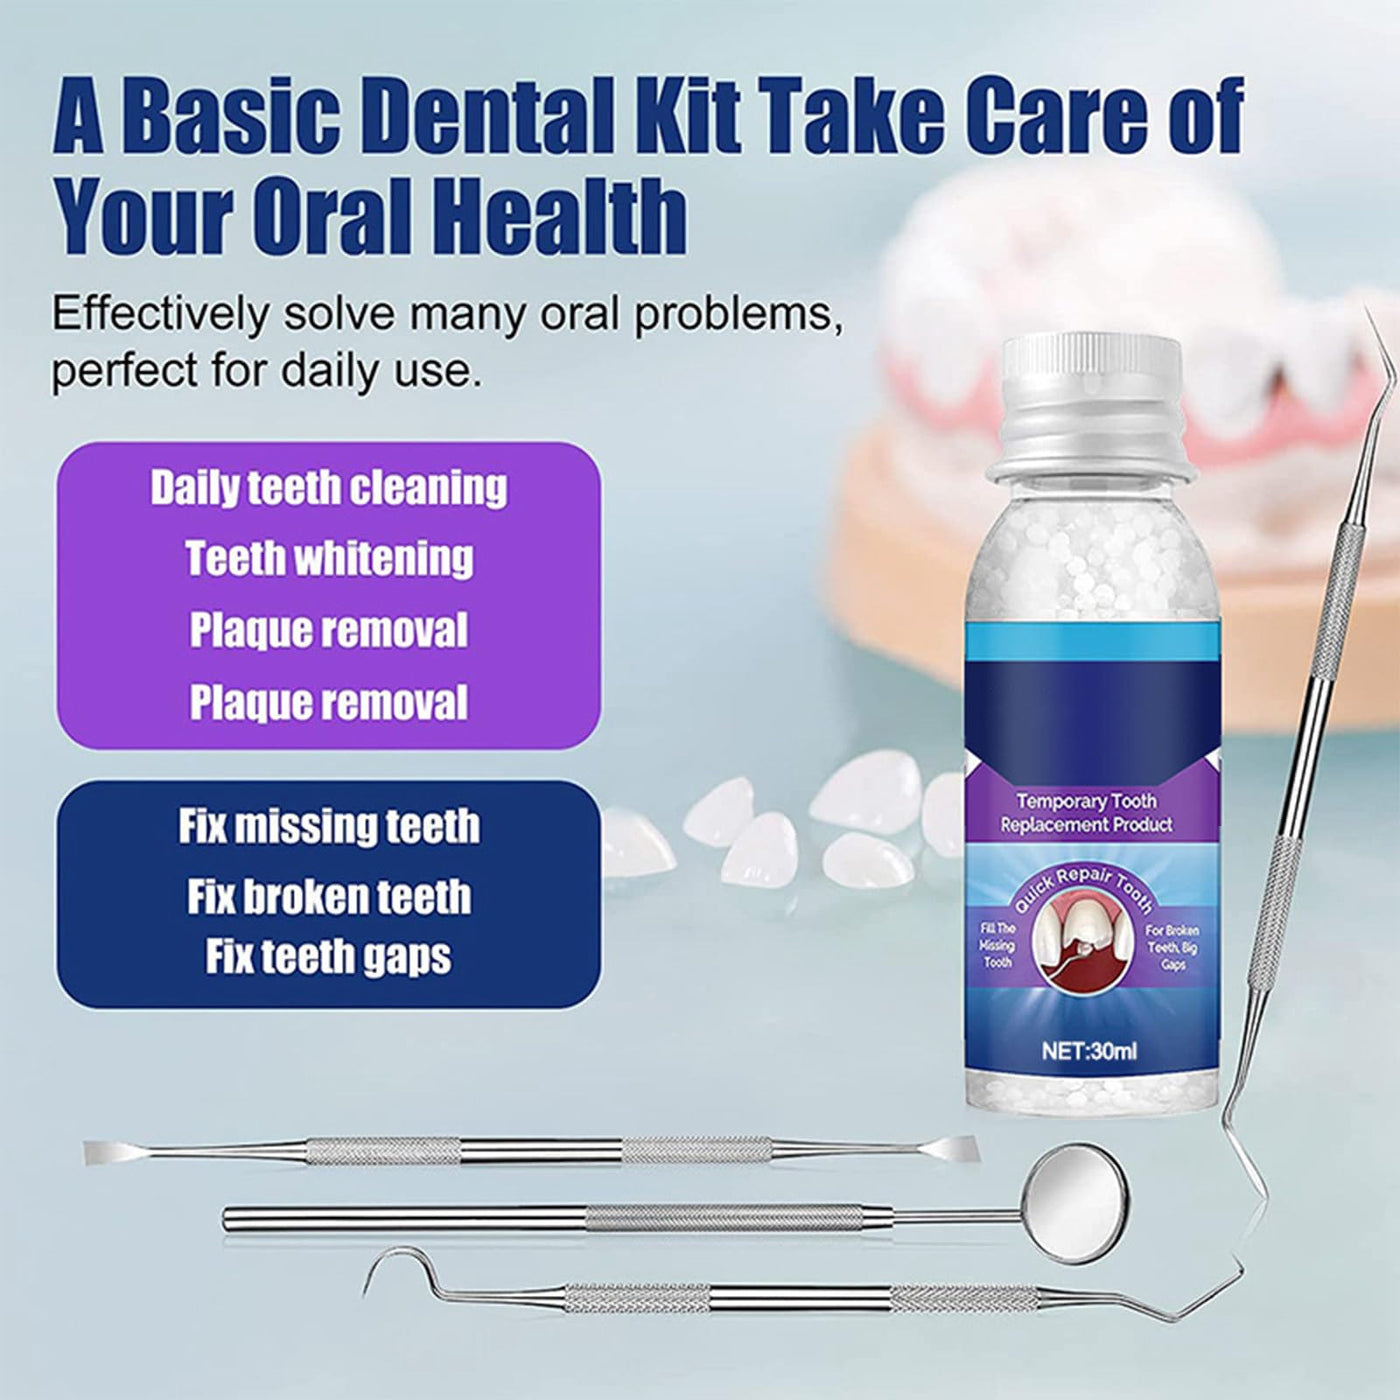 Tooth Repair Kit, Moldable Dental Care Kit for Fixing The Missing and  Broken Replacements, Filling Fake Teeth DIY at Home, Restoring Your  Confident